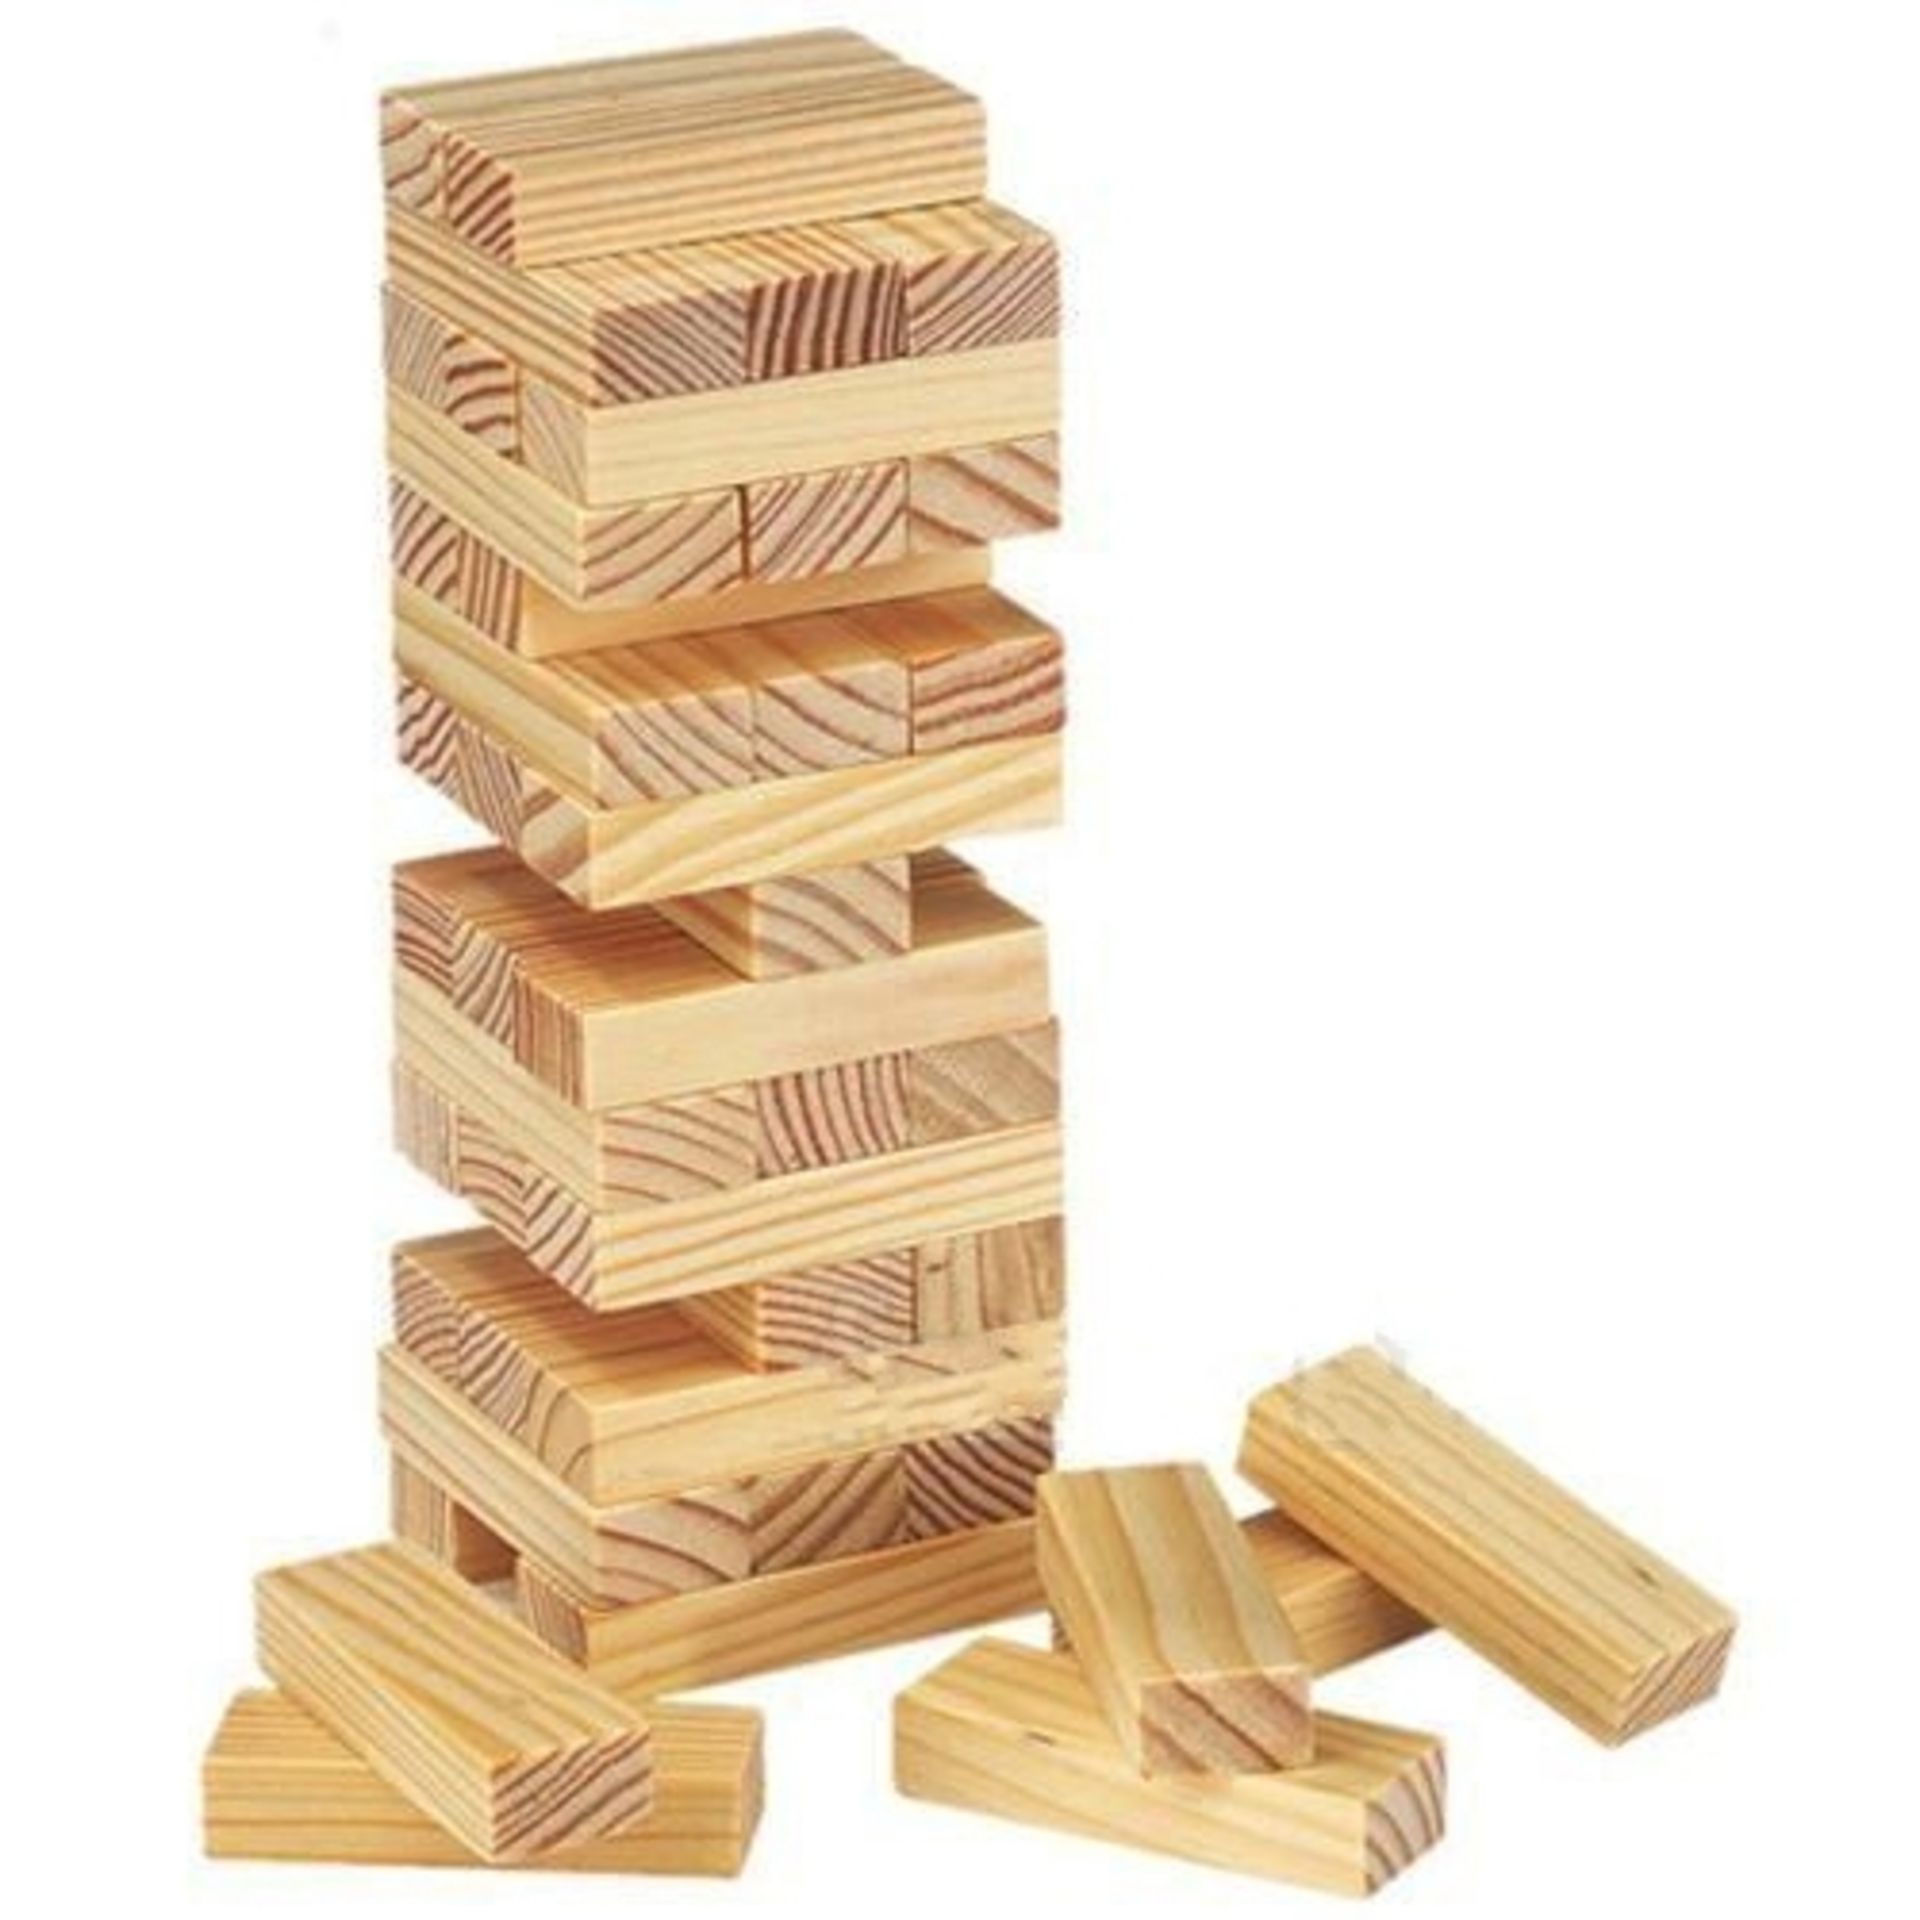 V Brand New Quality Wooden Tower Block Game X 2 Bid price to be multiplied by Two